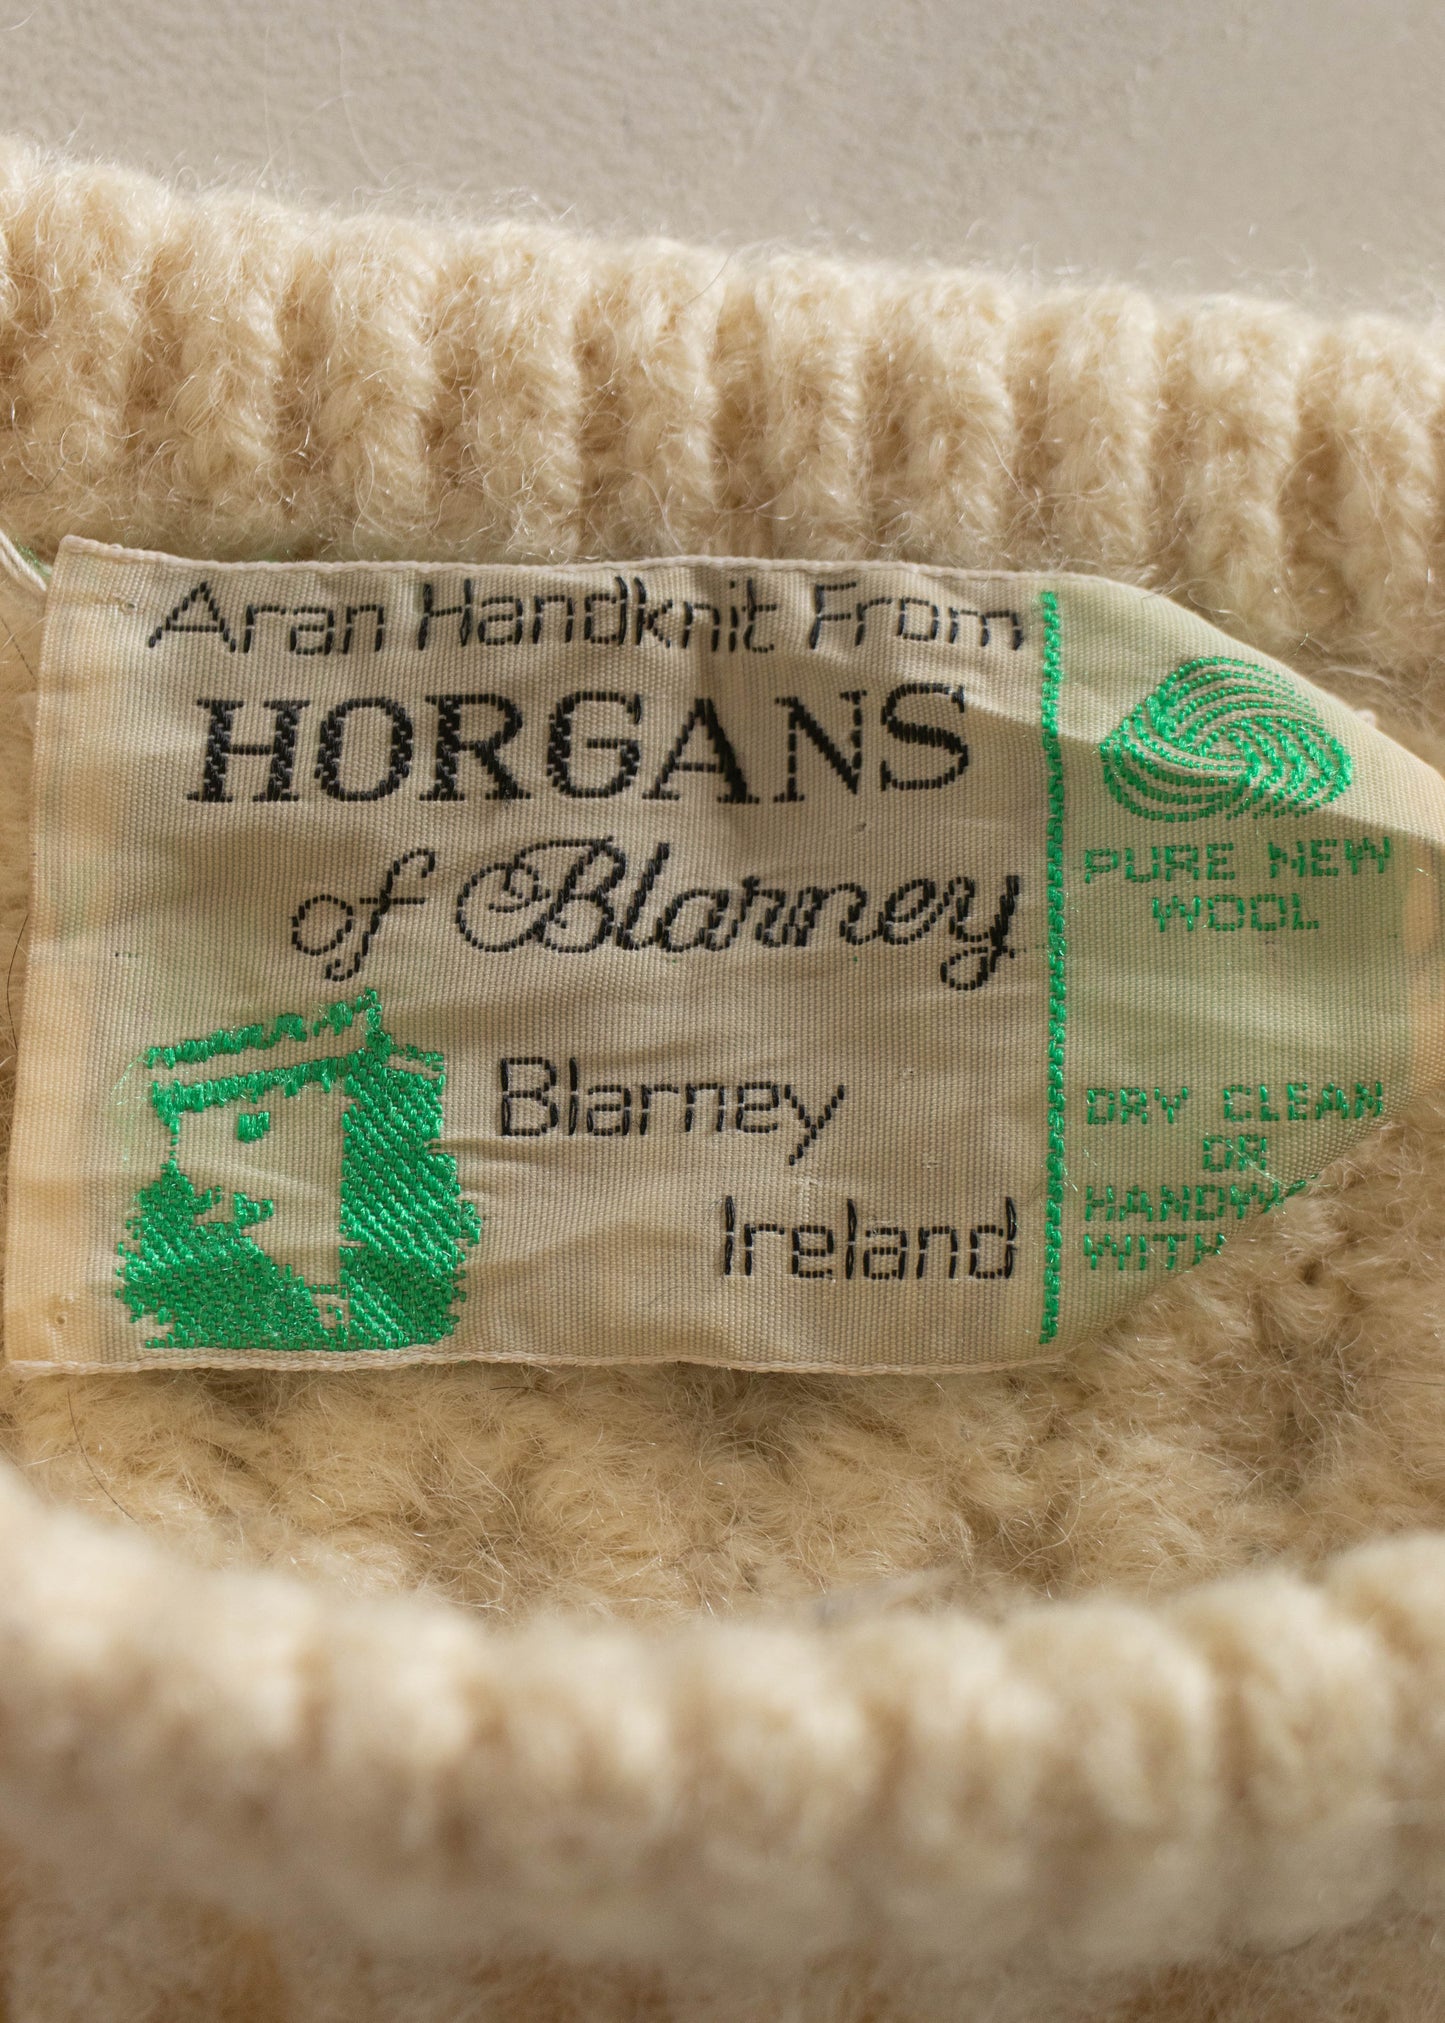 1980s Horgans of Blarney Cable Knit Wool Fisherman Sweater Size S/M